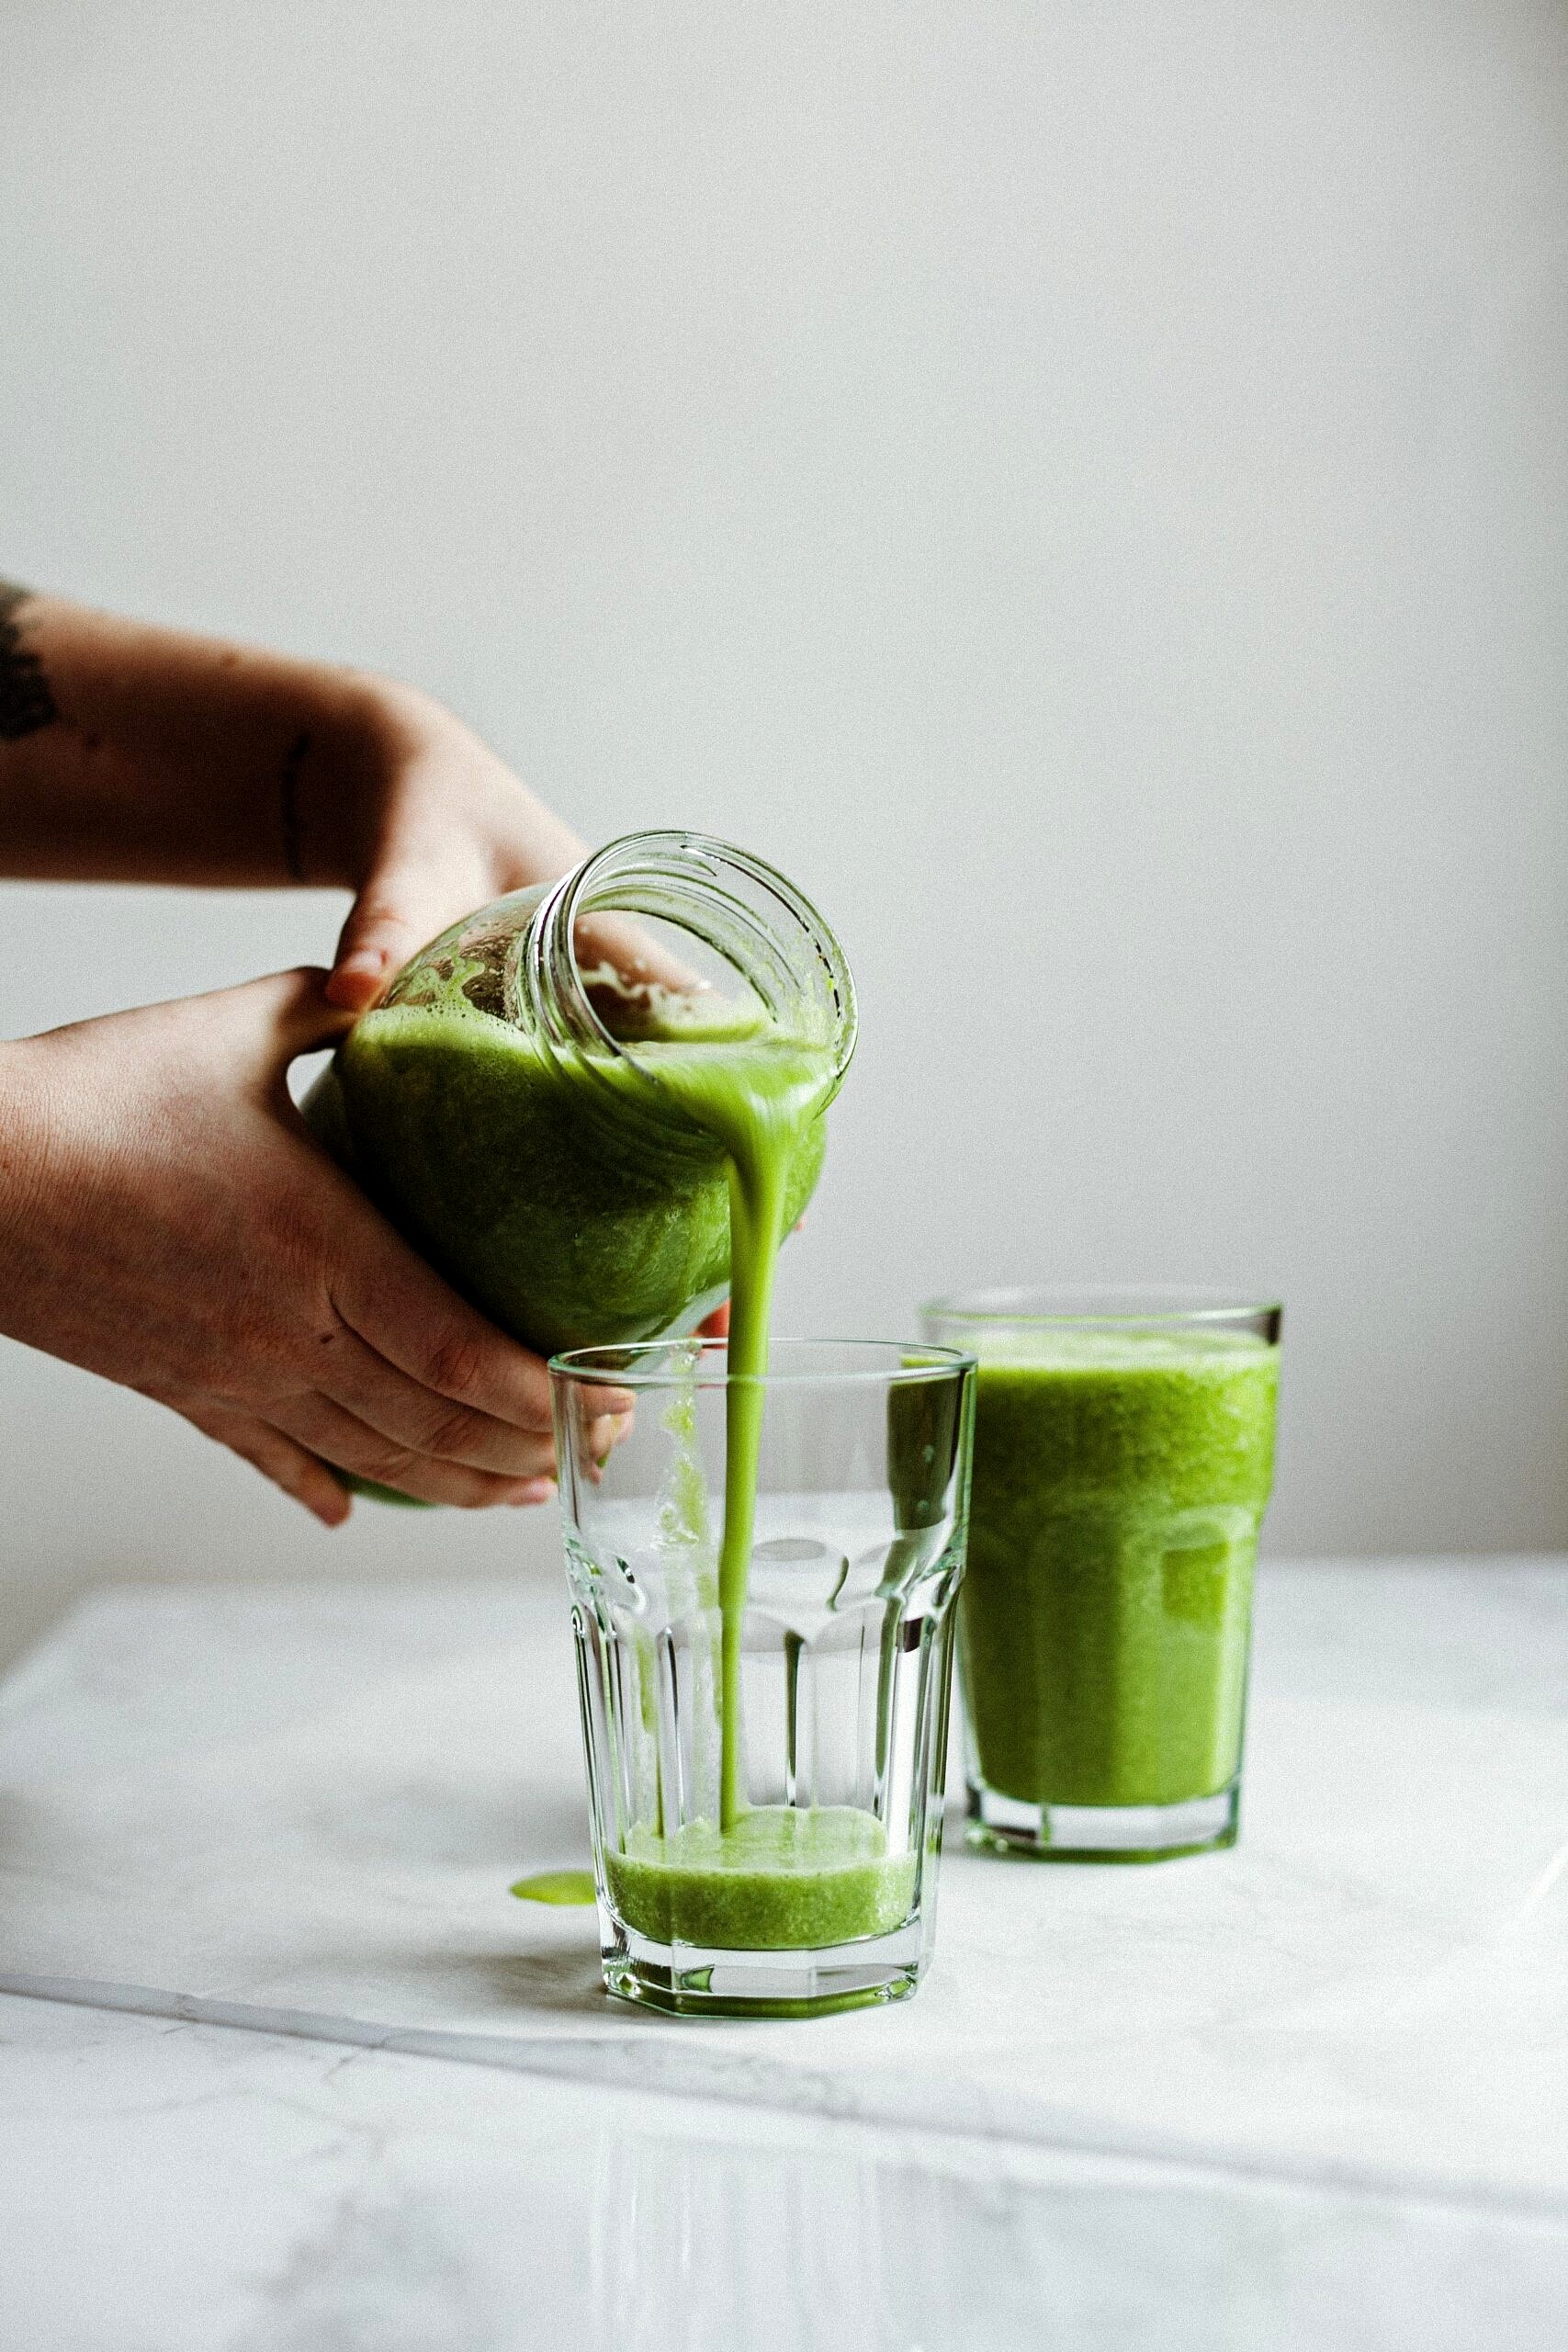 Hands pouring green juice into a clear glass.